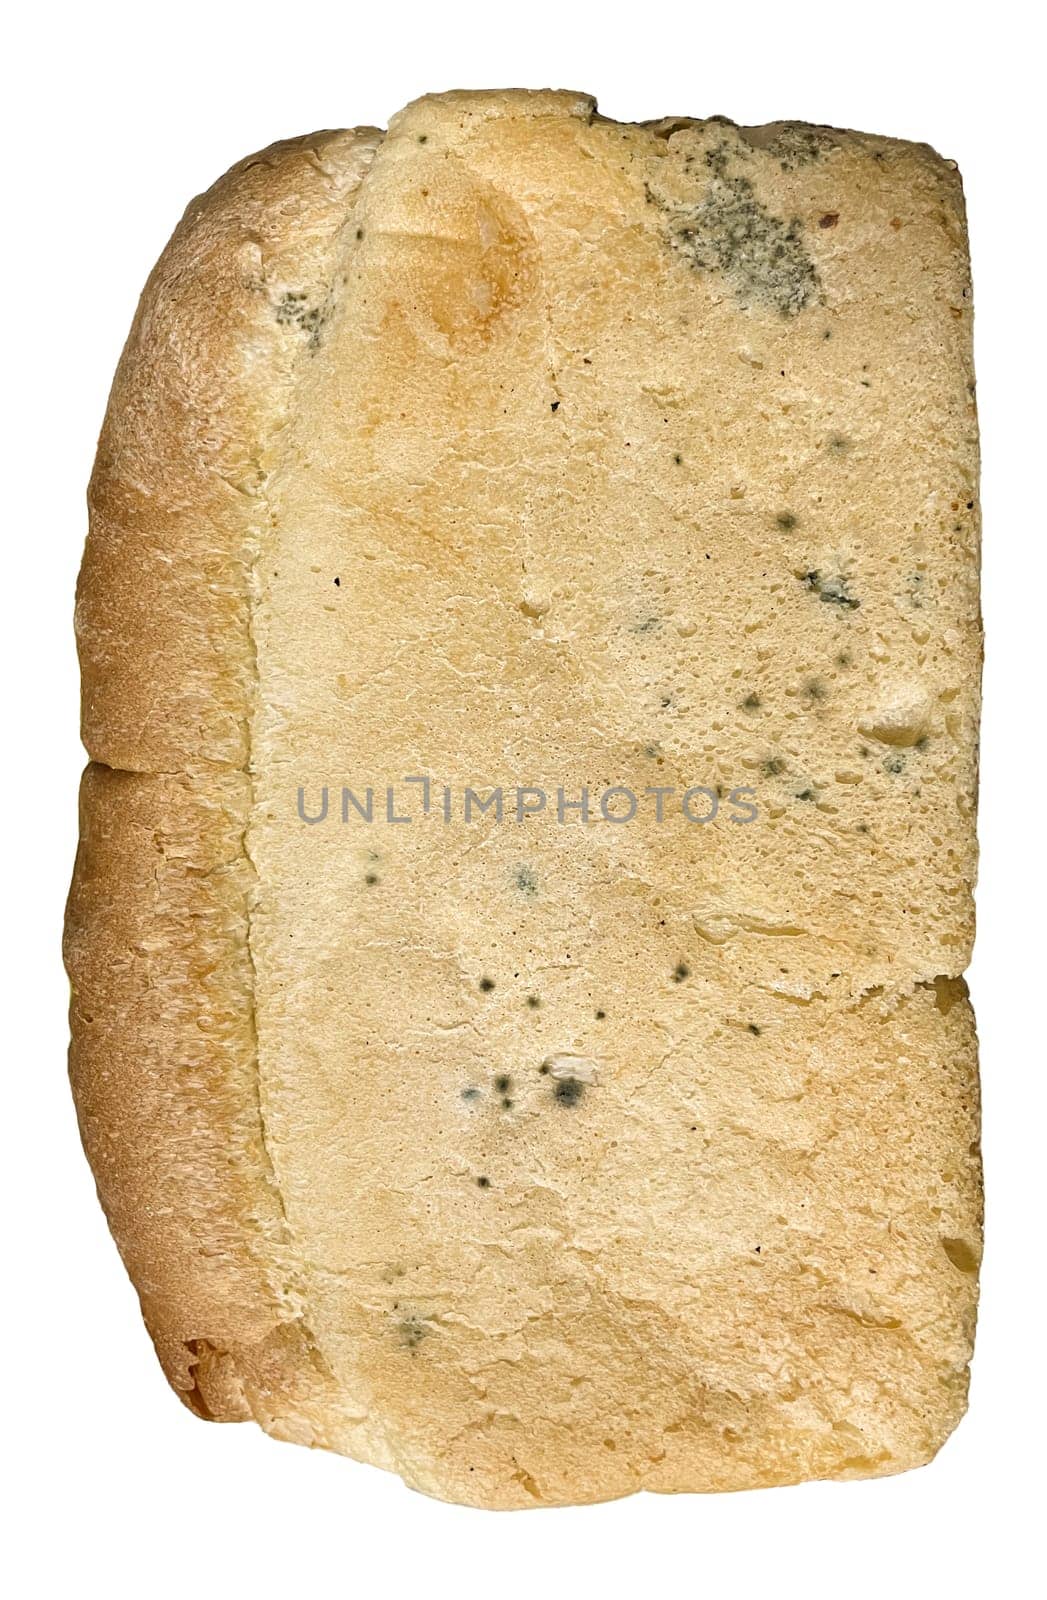 moldy loaf of white bread on a white background.